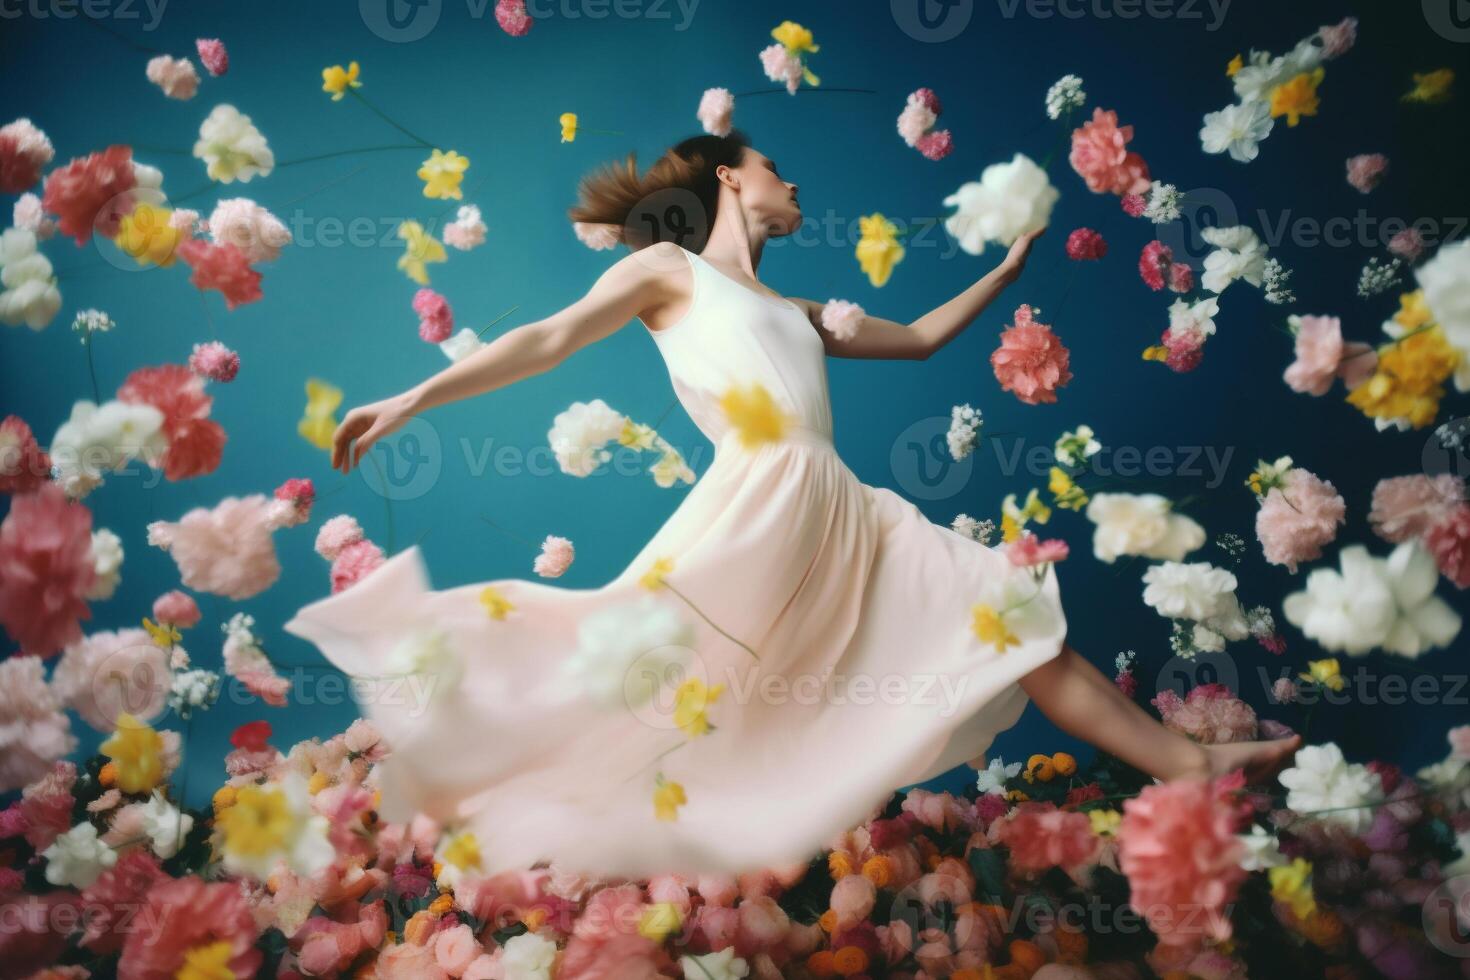 woman with flowers, spring concept photo